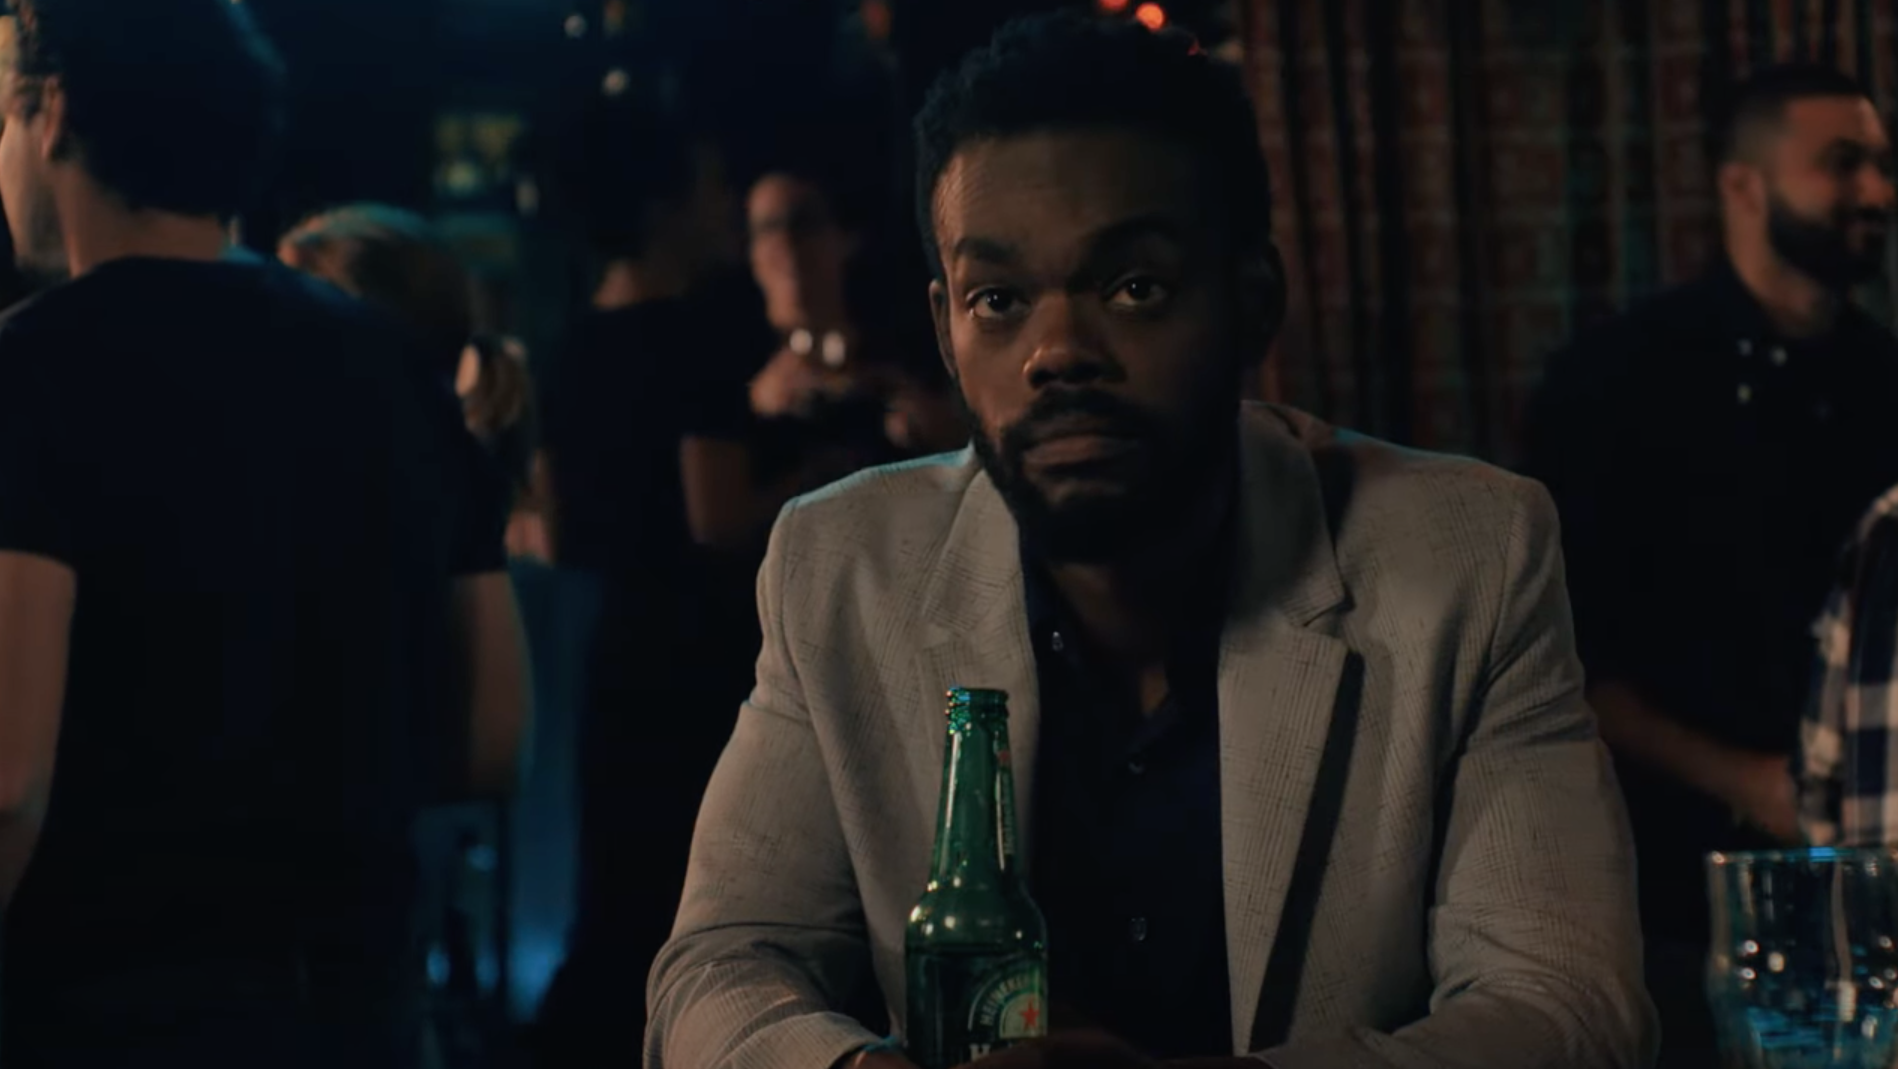 It’s William Jackson Harper’s turn to find love as Marcus in Love Life season 2